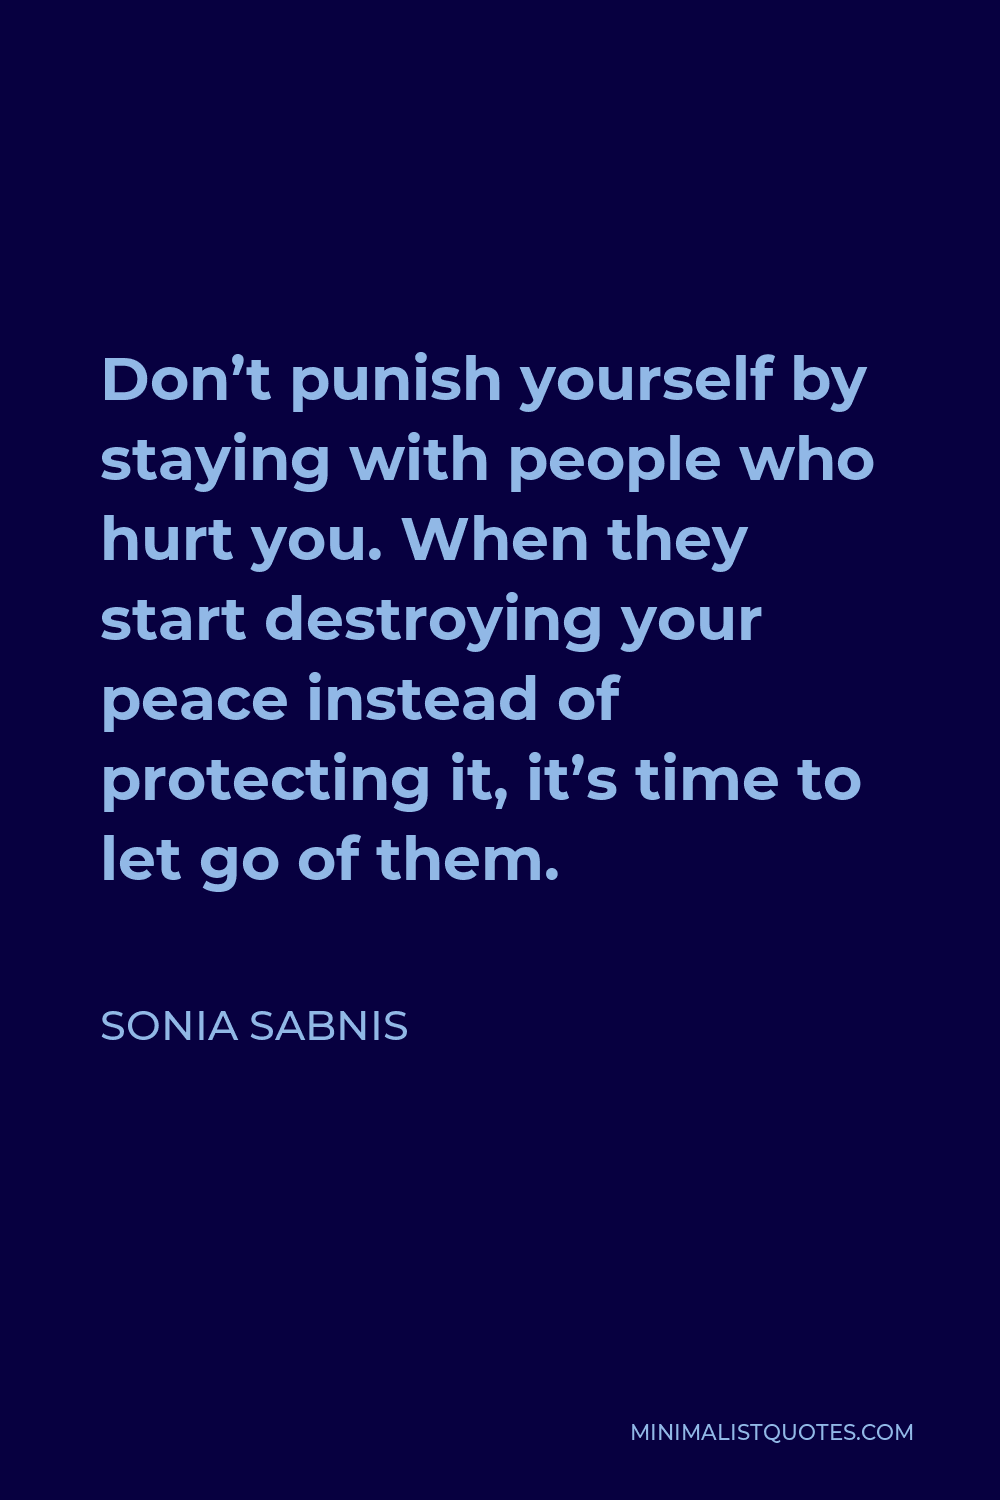 Sonia Sabnis Quote - Don’t punish yourself by staying with people who hurt you. When they start destroying your peace instead of protecting it, it’s time to let go of them.